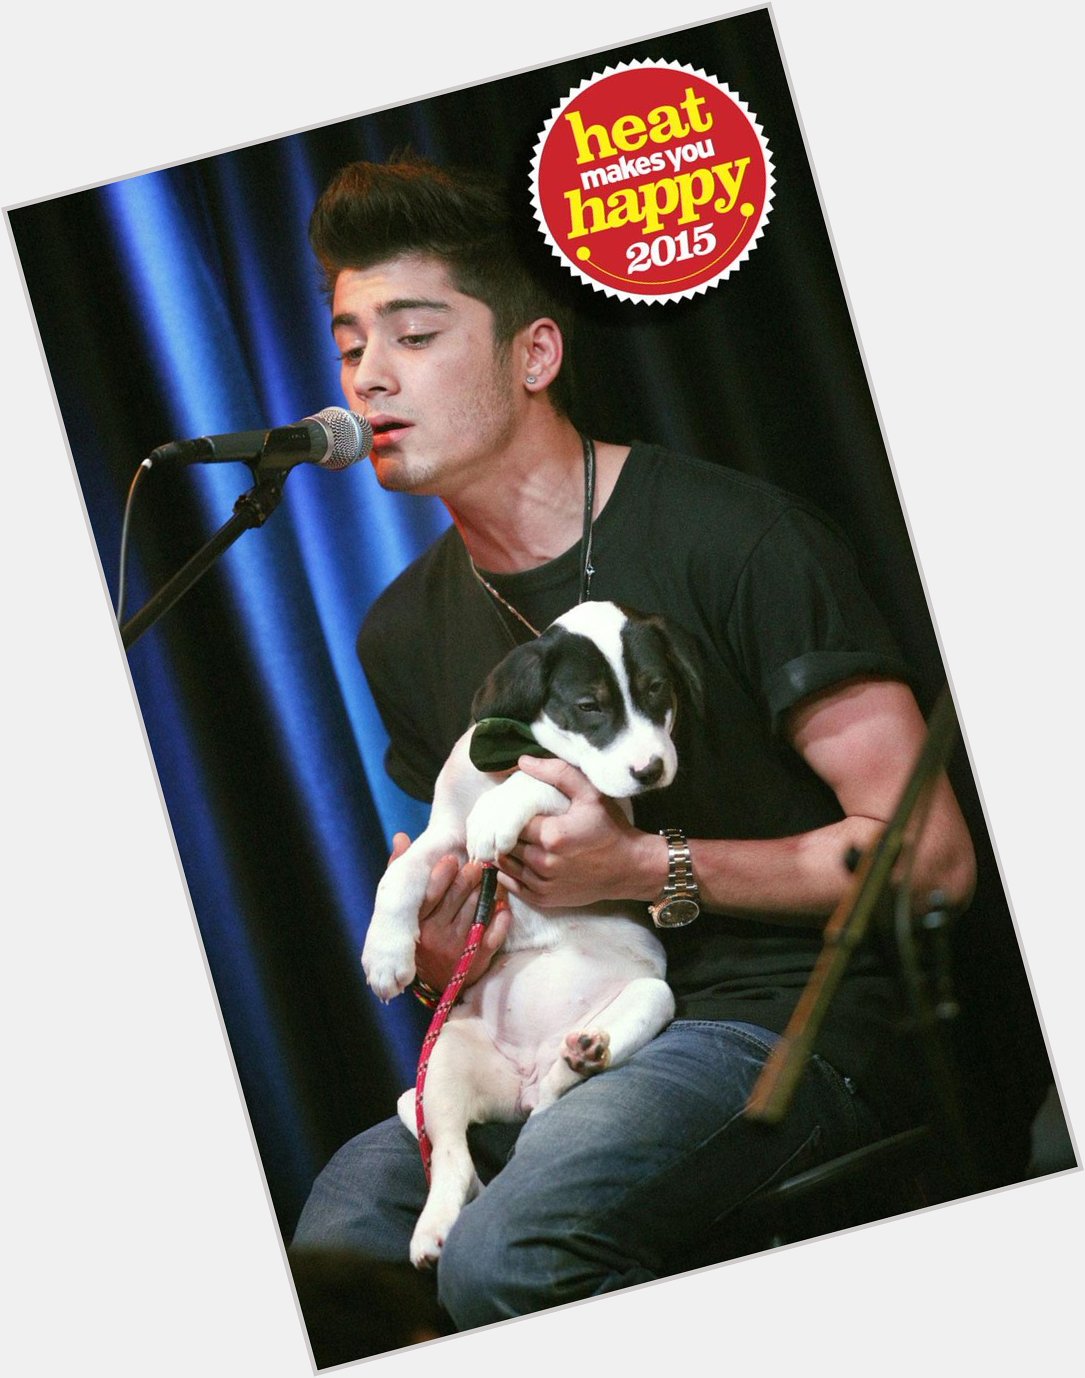 Pics of 1D\s Zayn with puppies, kittens & babies to celebrate his birthday! 